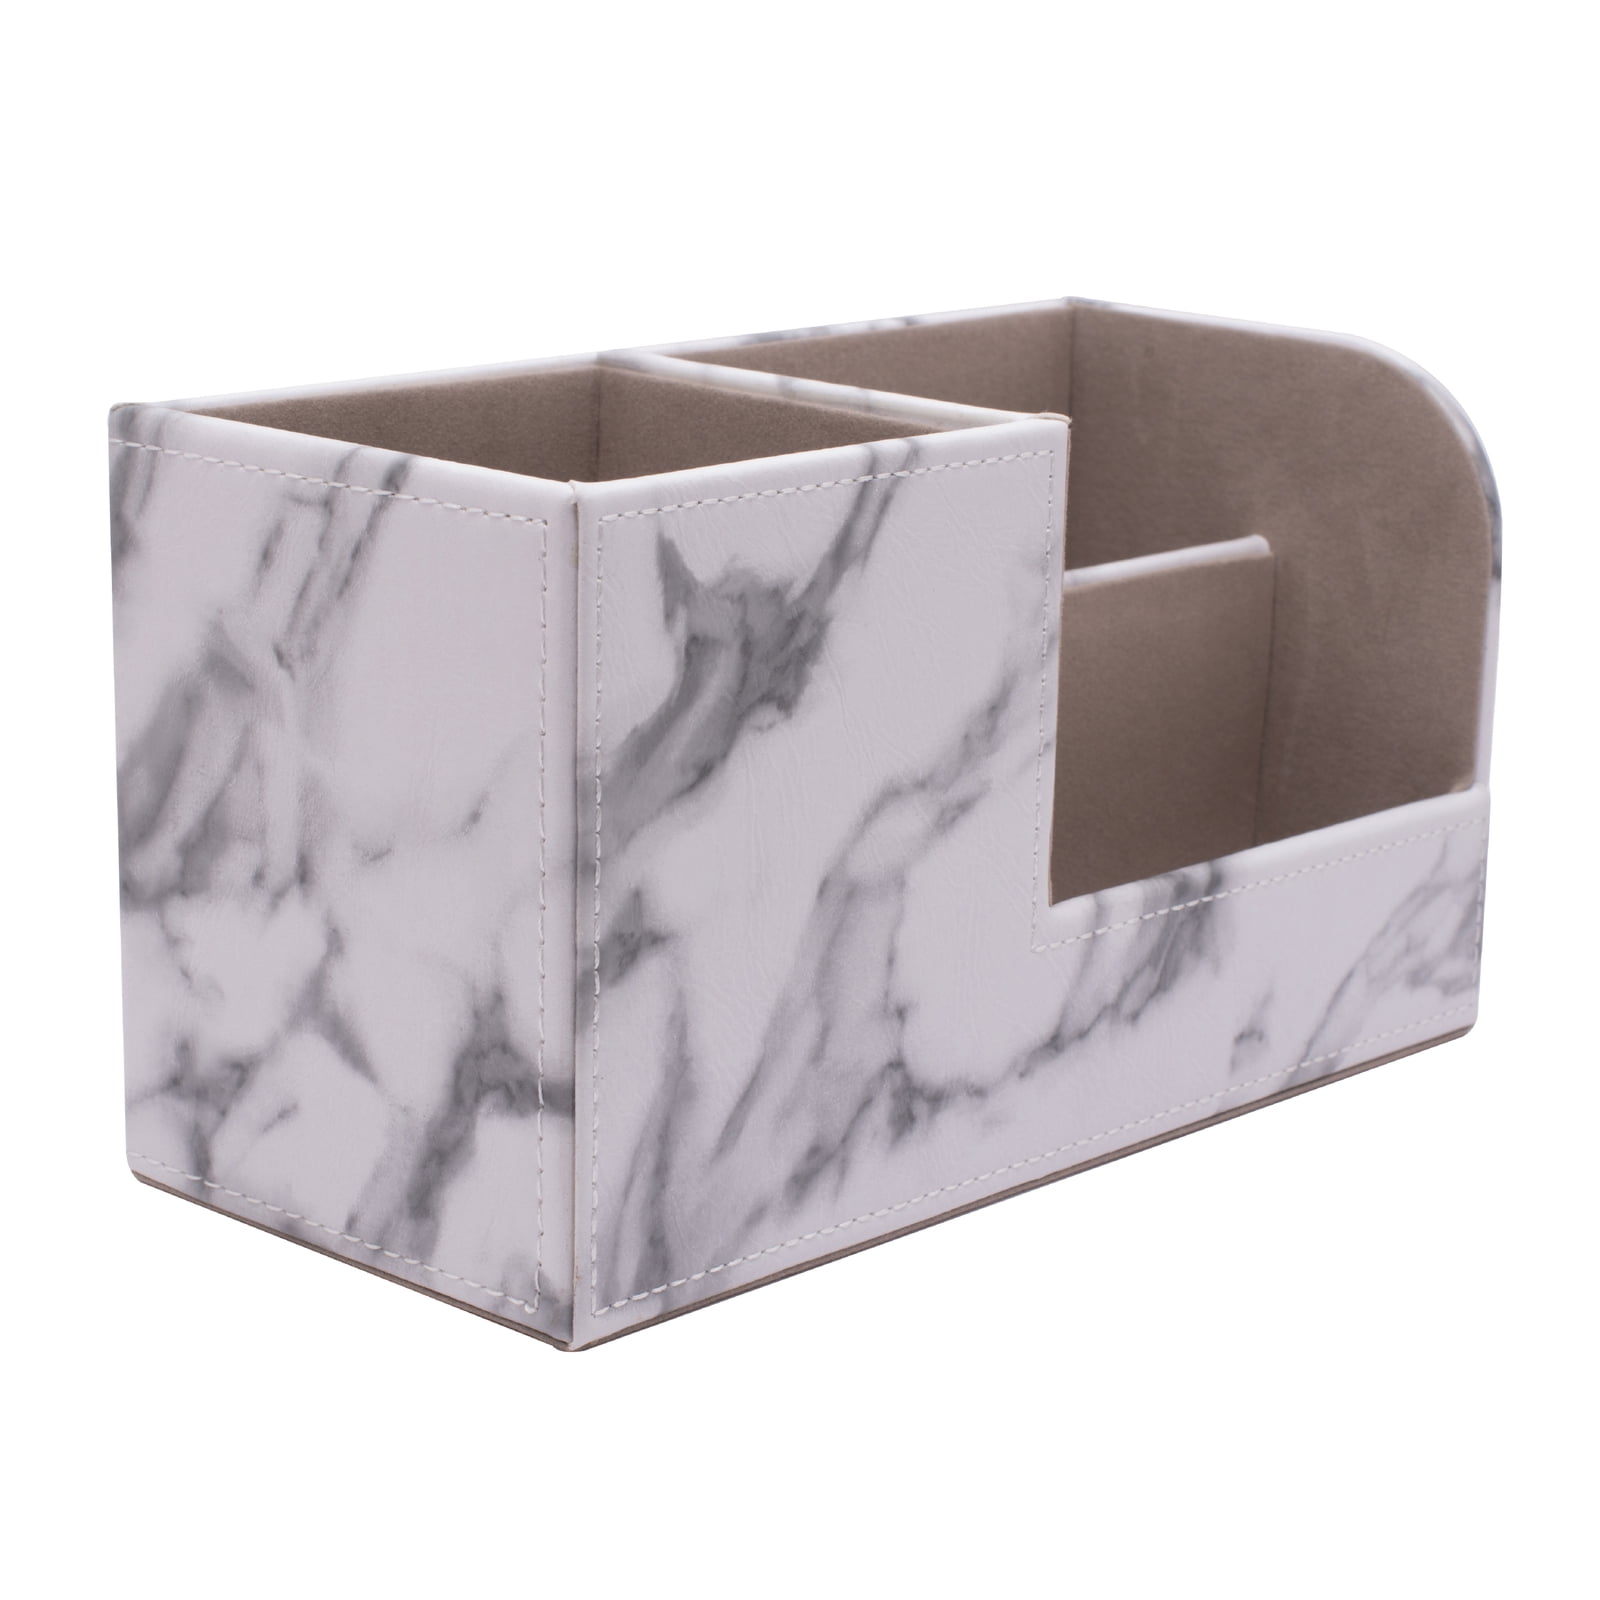 My Space Organizers Marble Desk Organizer For Office Supplies And  Accessories - 9 Sections - Pencil Pen Holder Storage - Desktop Organization  Decor